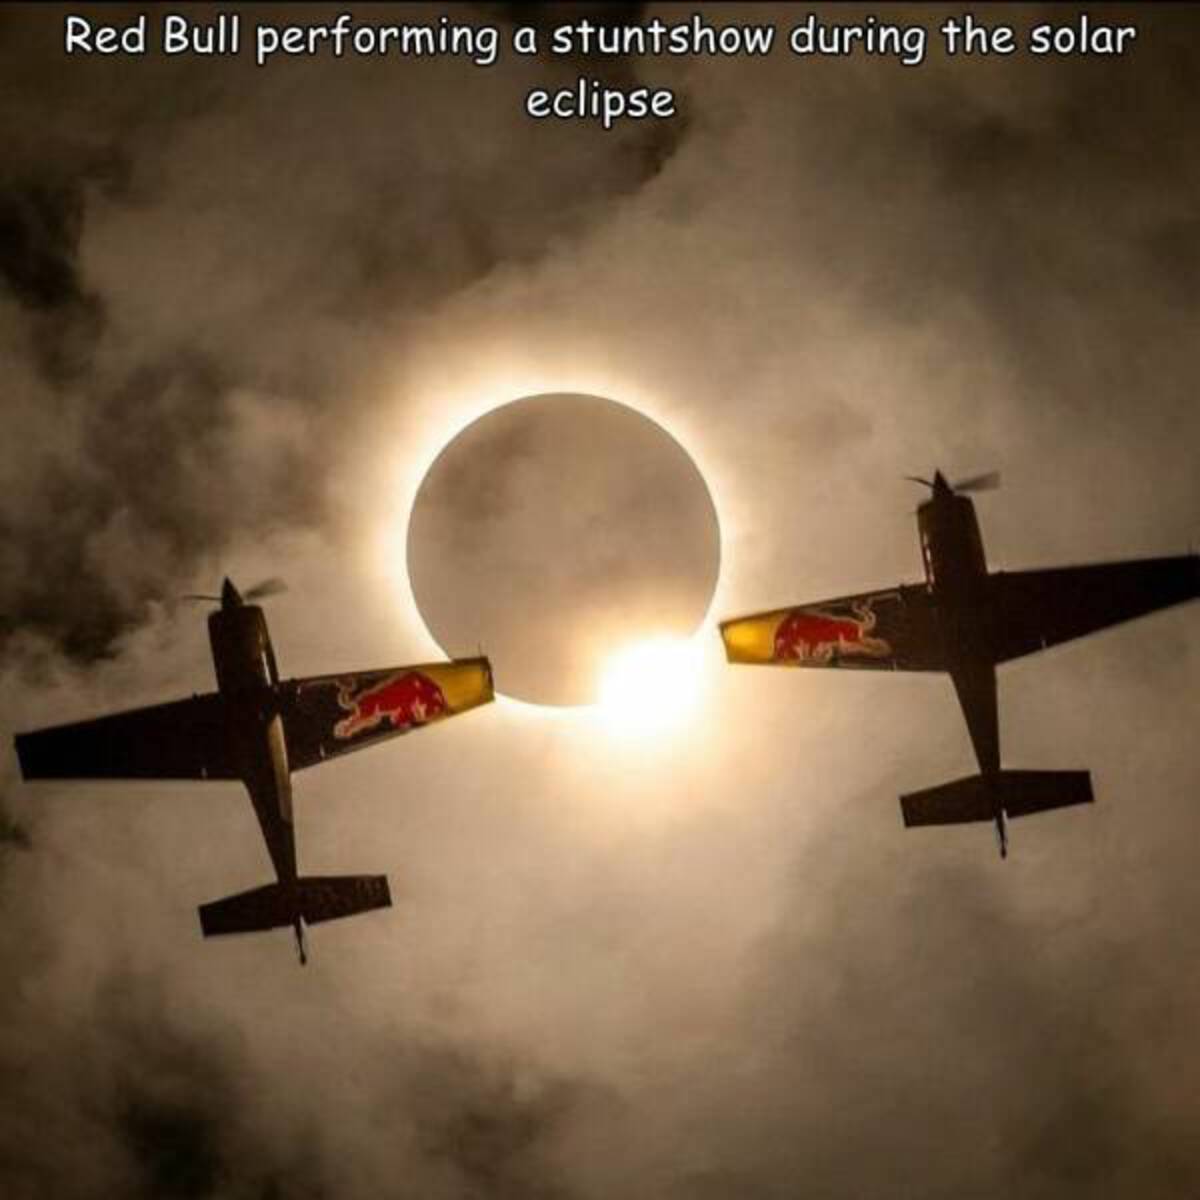 Solar eclipse - Red Bull performing a stuntshow during the solar eclipse